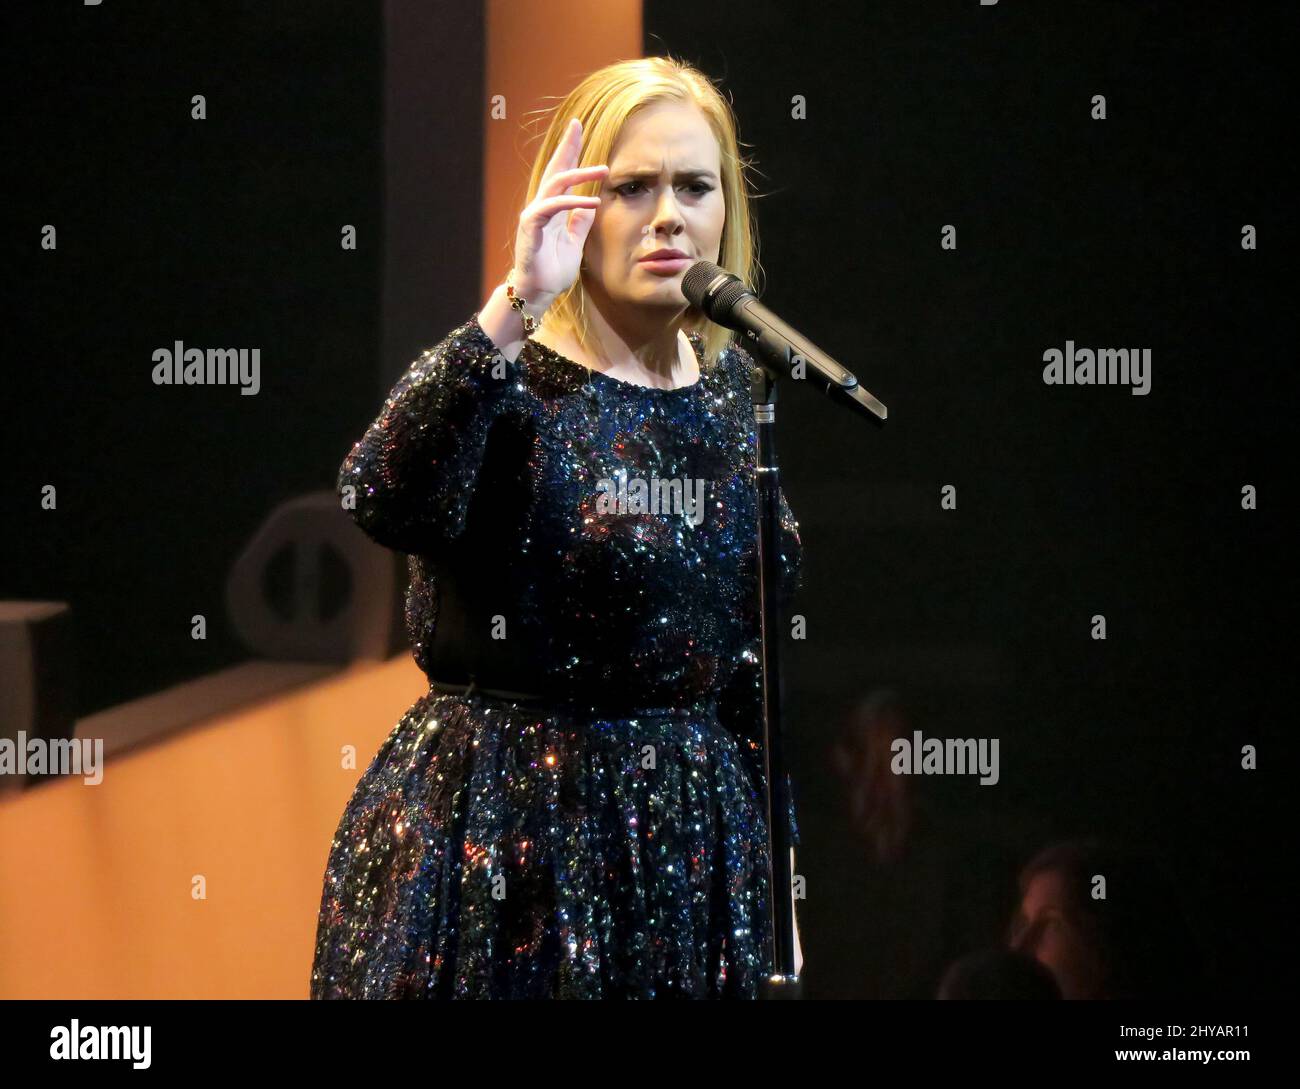 Adele peforms live in concert for her second night at the Bridgestone Arena in Nashville, USA. Stock Photo